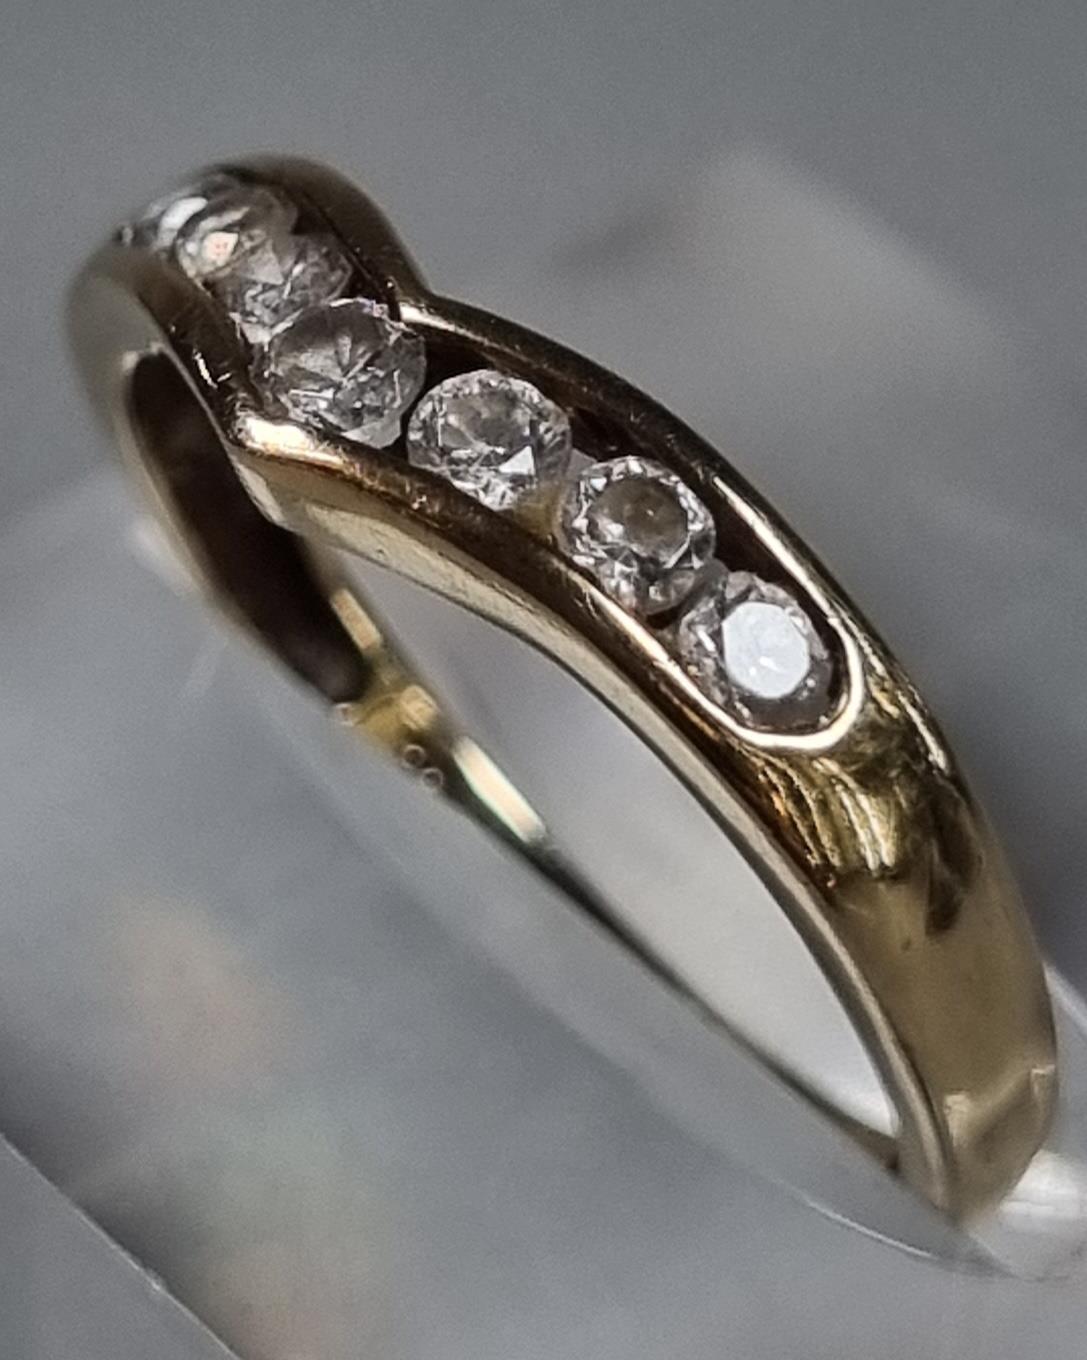 9ct gold and cubic zirconia wishbone ring. 1.4g approx. Size L1/2. (B.P. 21% + VAT) - Image 2 of 4